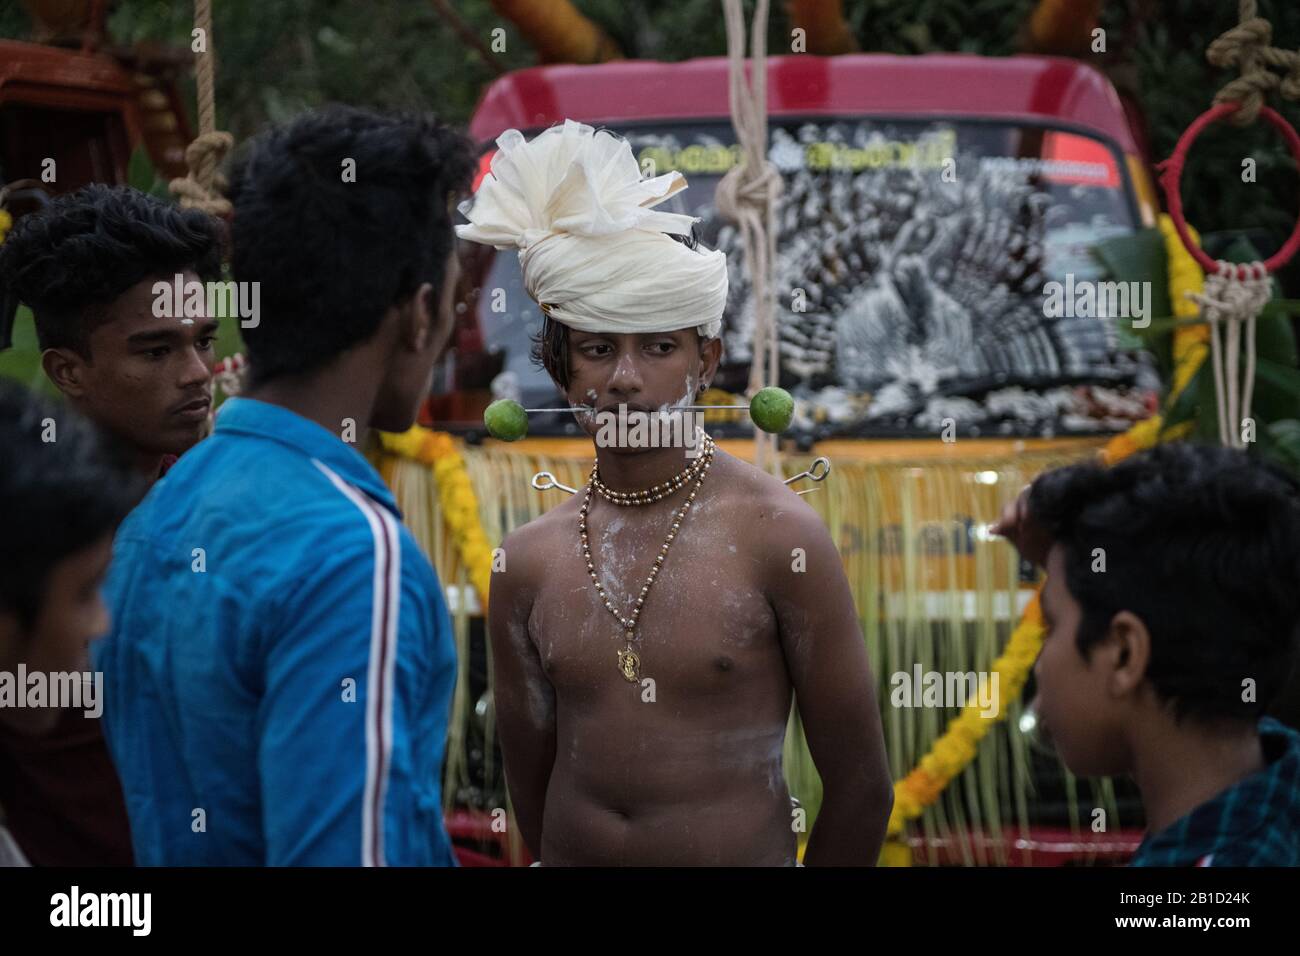 Devotee with spear-pierced mouths (Kavadi Aattam) as an act of devotion during Thaipooyam, or Thaipoosam, Festival in Kedakulam, Kerala. Stock Photo